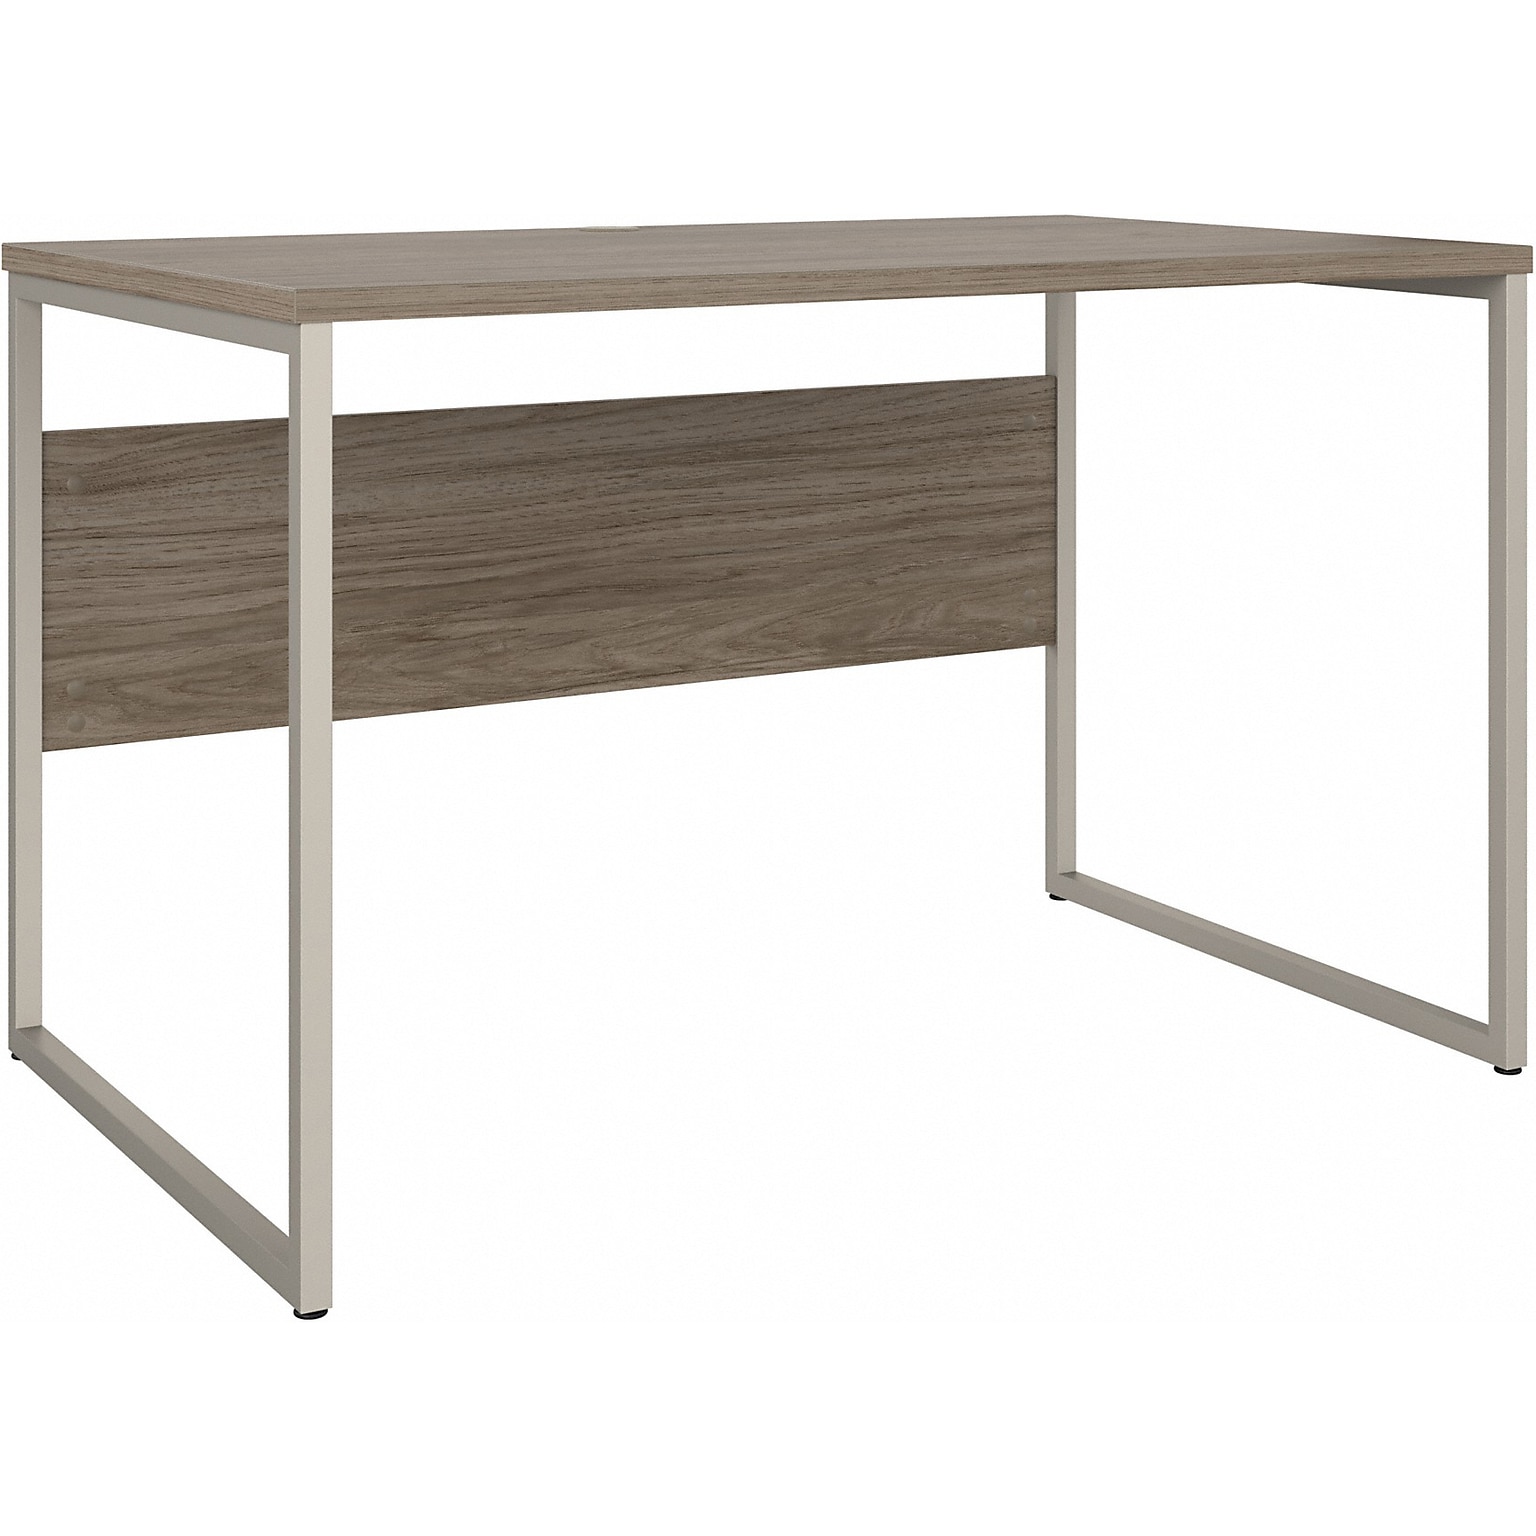 Bush Business Furniture Hybrid 48 W Computer Table Desk with Metal Legs, Modern Hickory (HYD248MH)